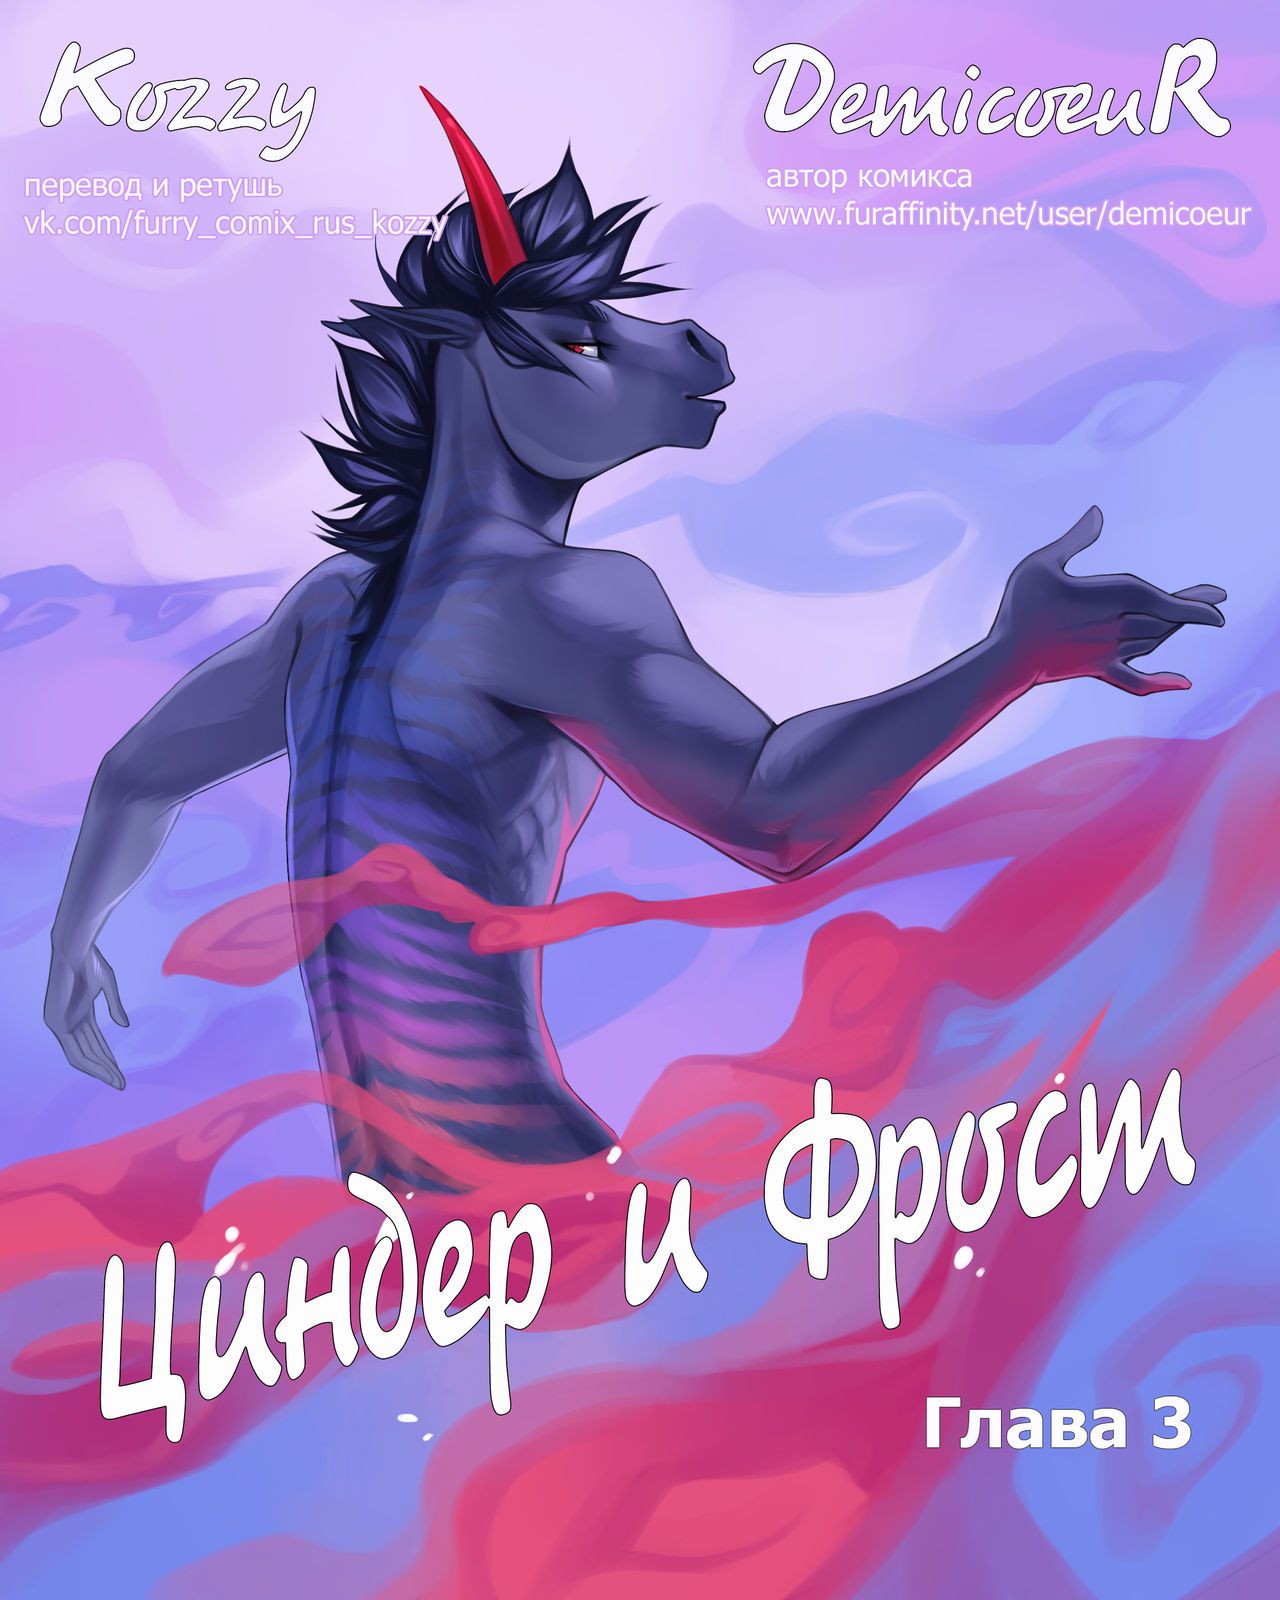 [Demicoeur] Cinder Frost 3 | Циндер и Фрост 3 [Russian] [Kozzy] 1